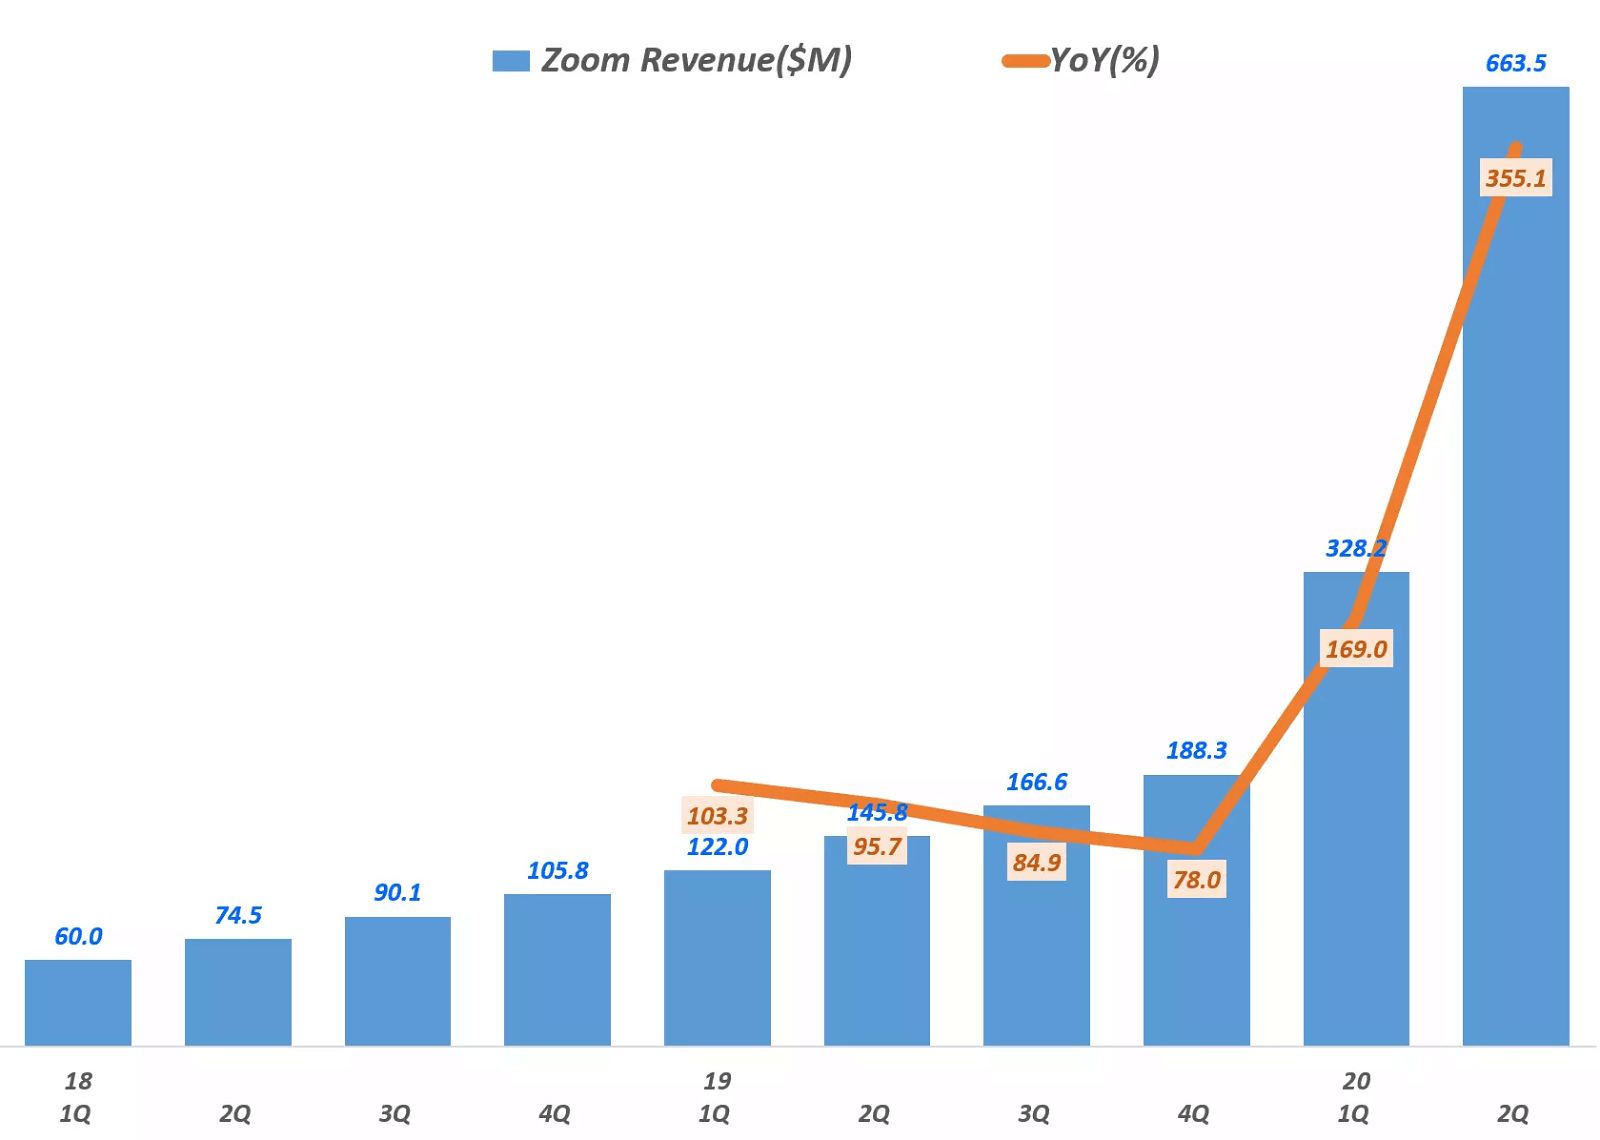 Zoom Querterly Revenue Grow rate Graph by Happist